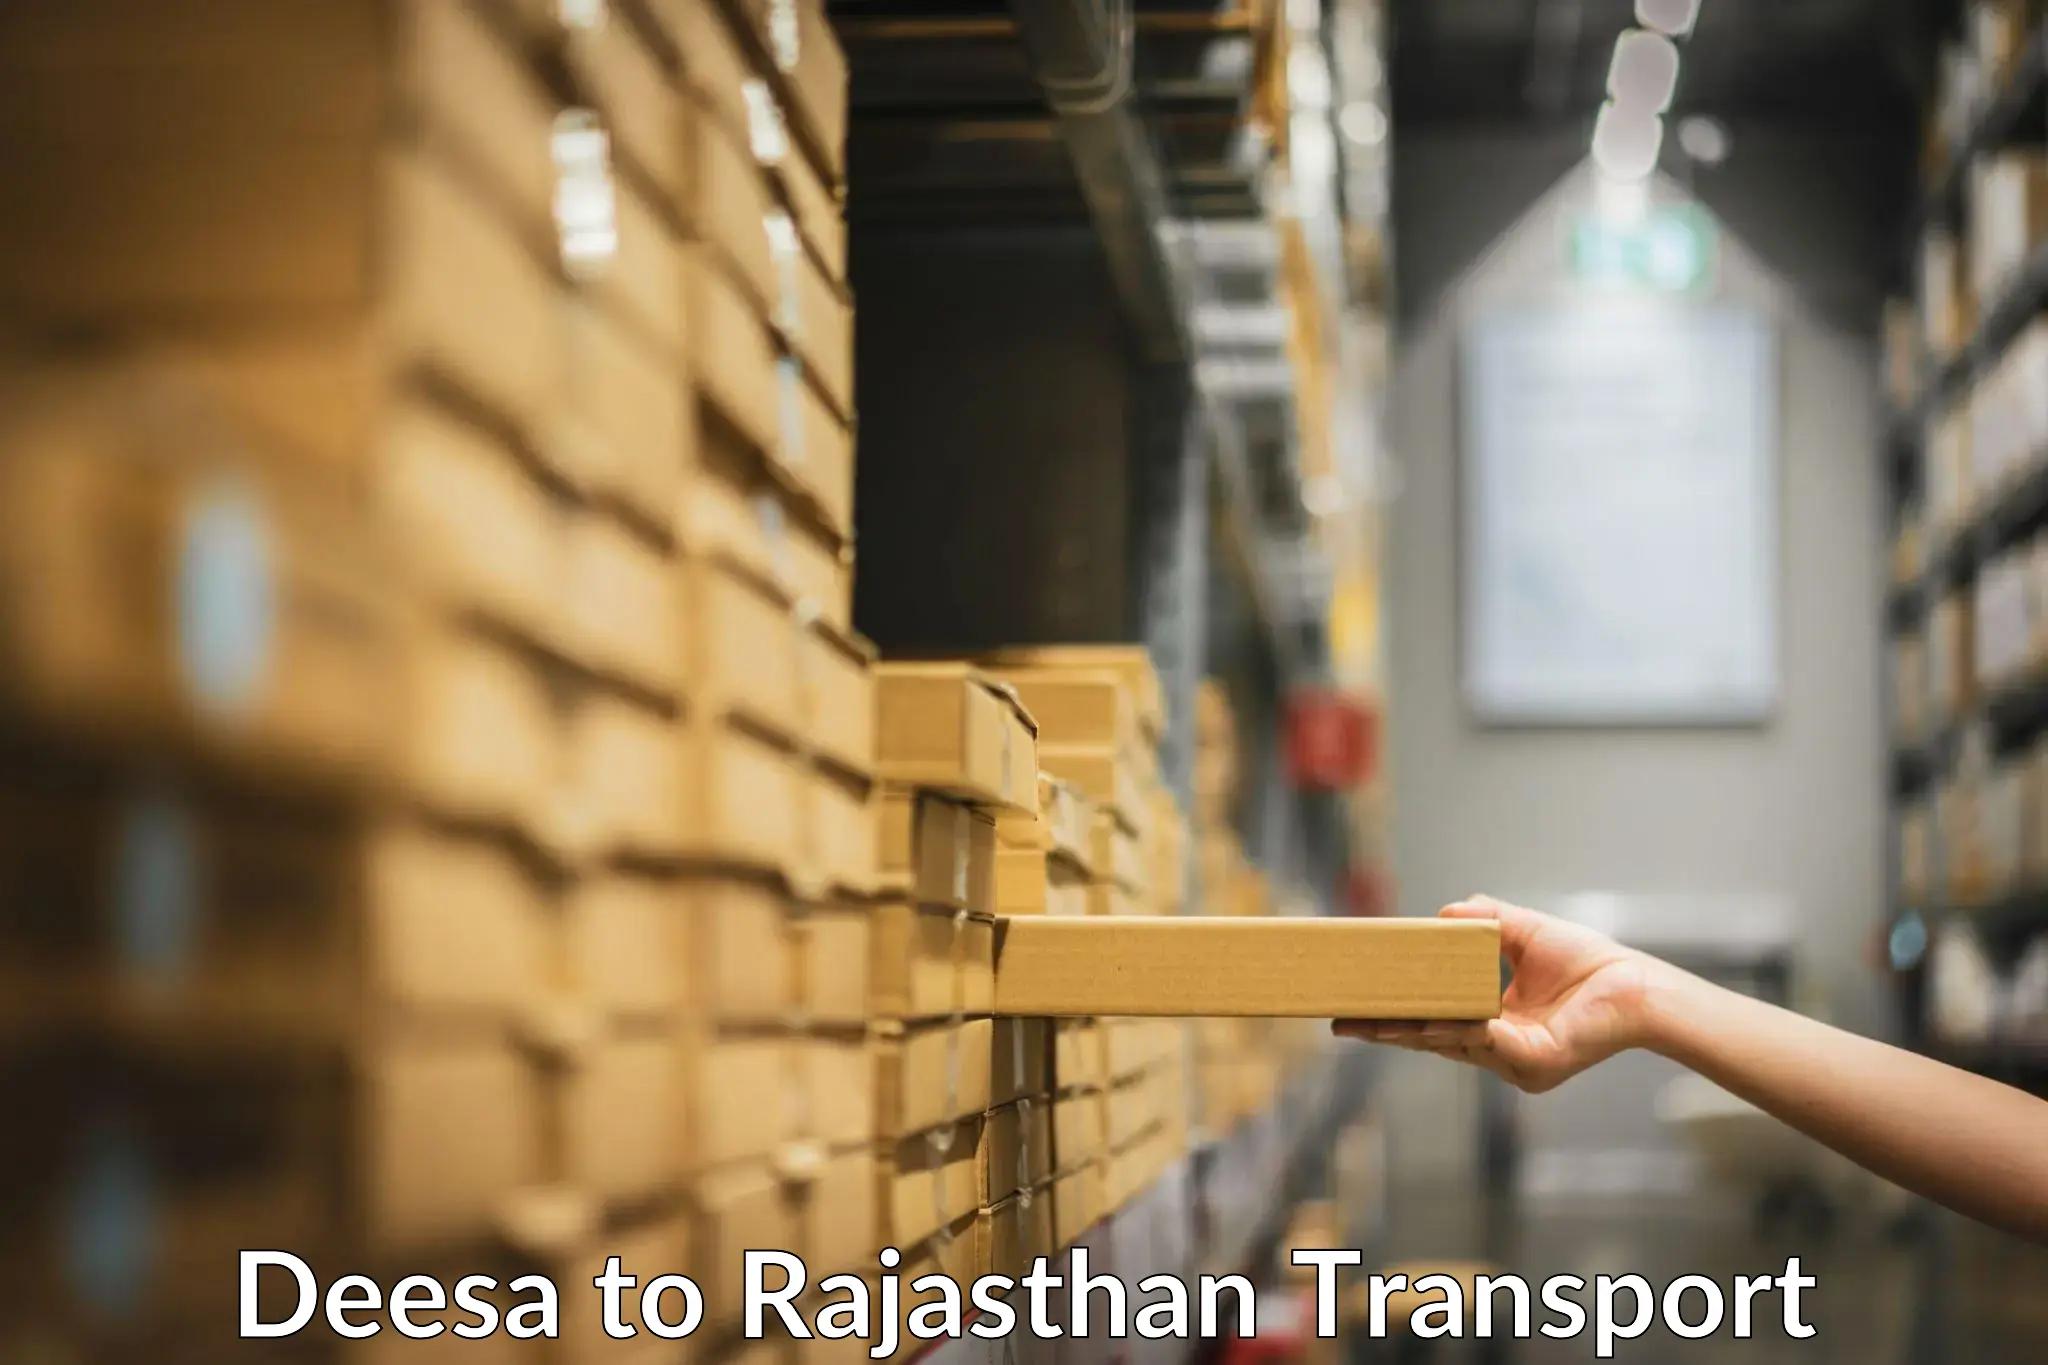 Nearby transport service Deesa to Rajasthan